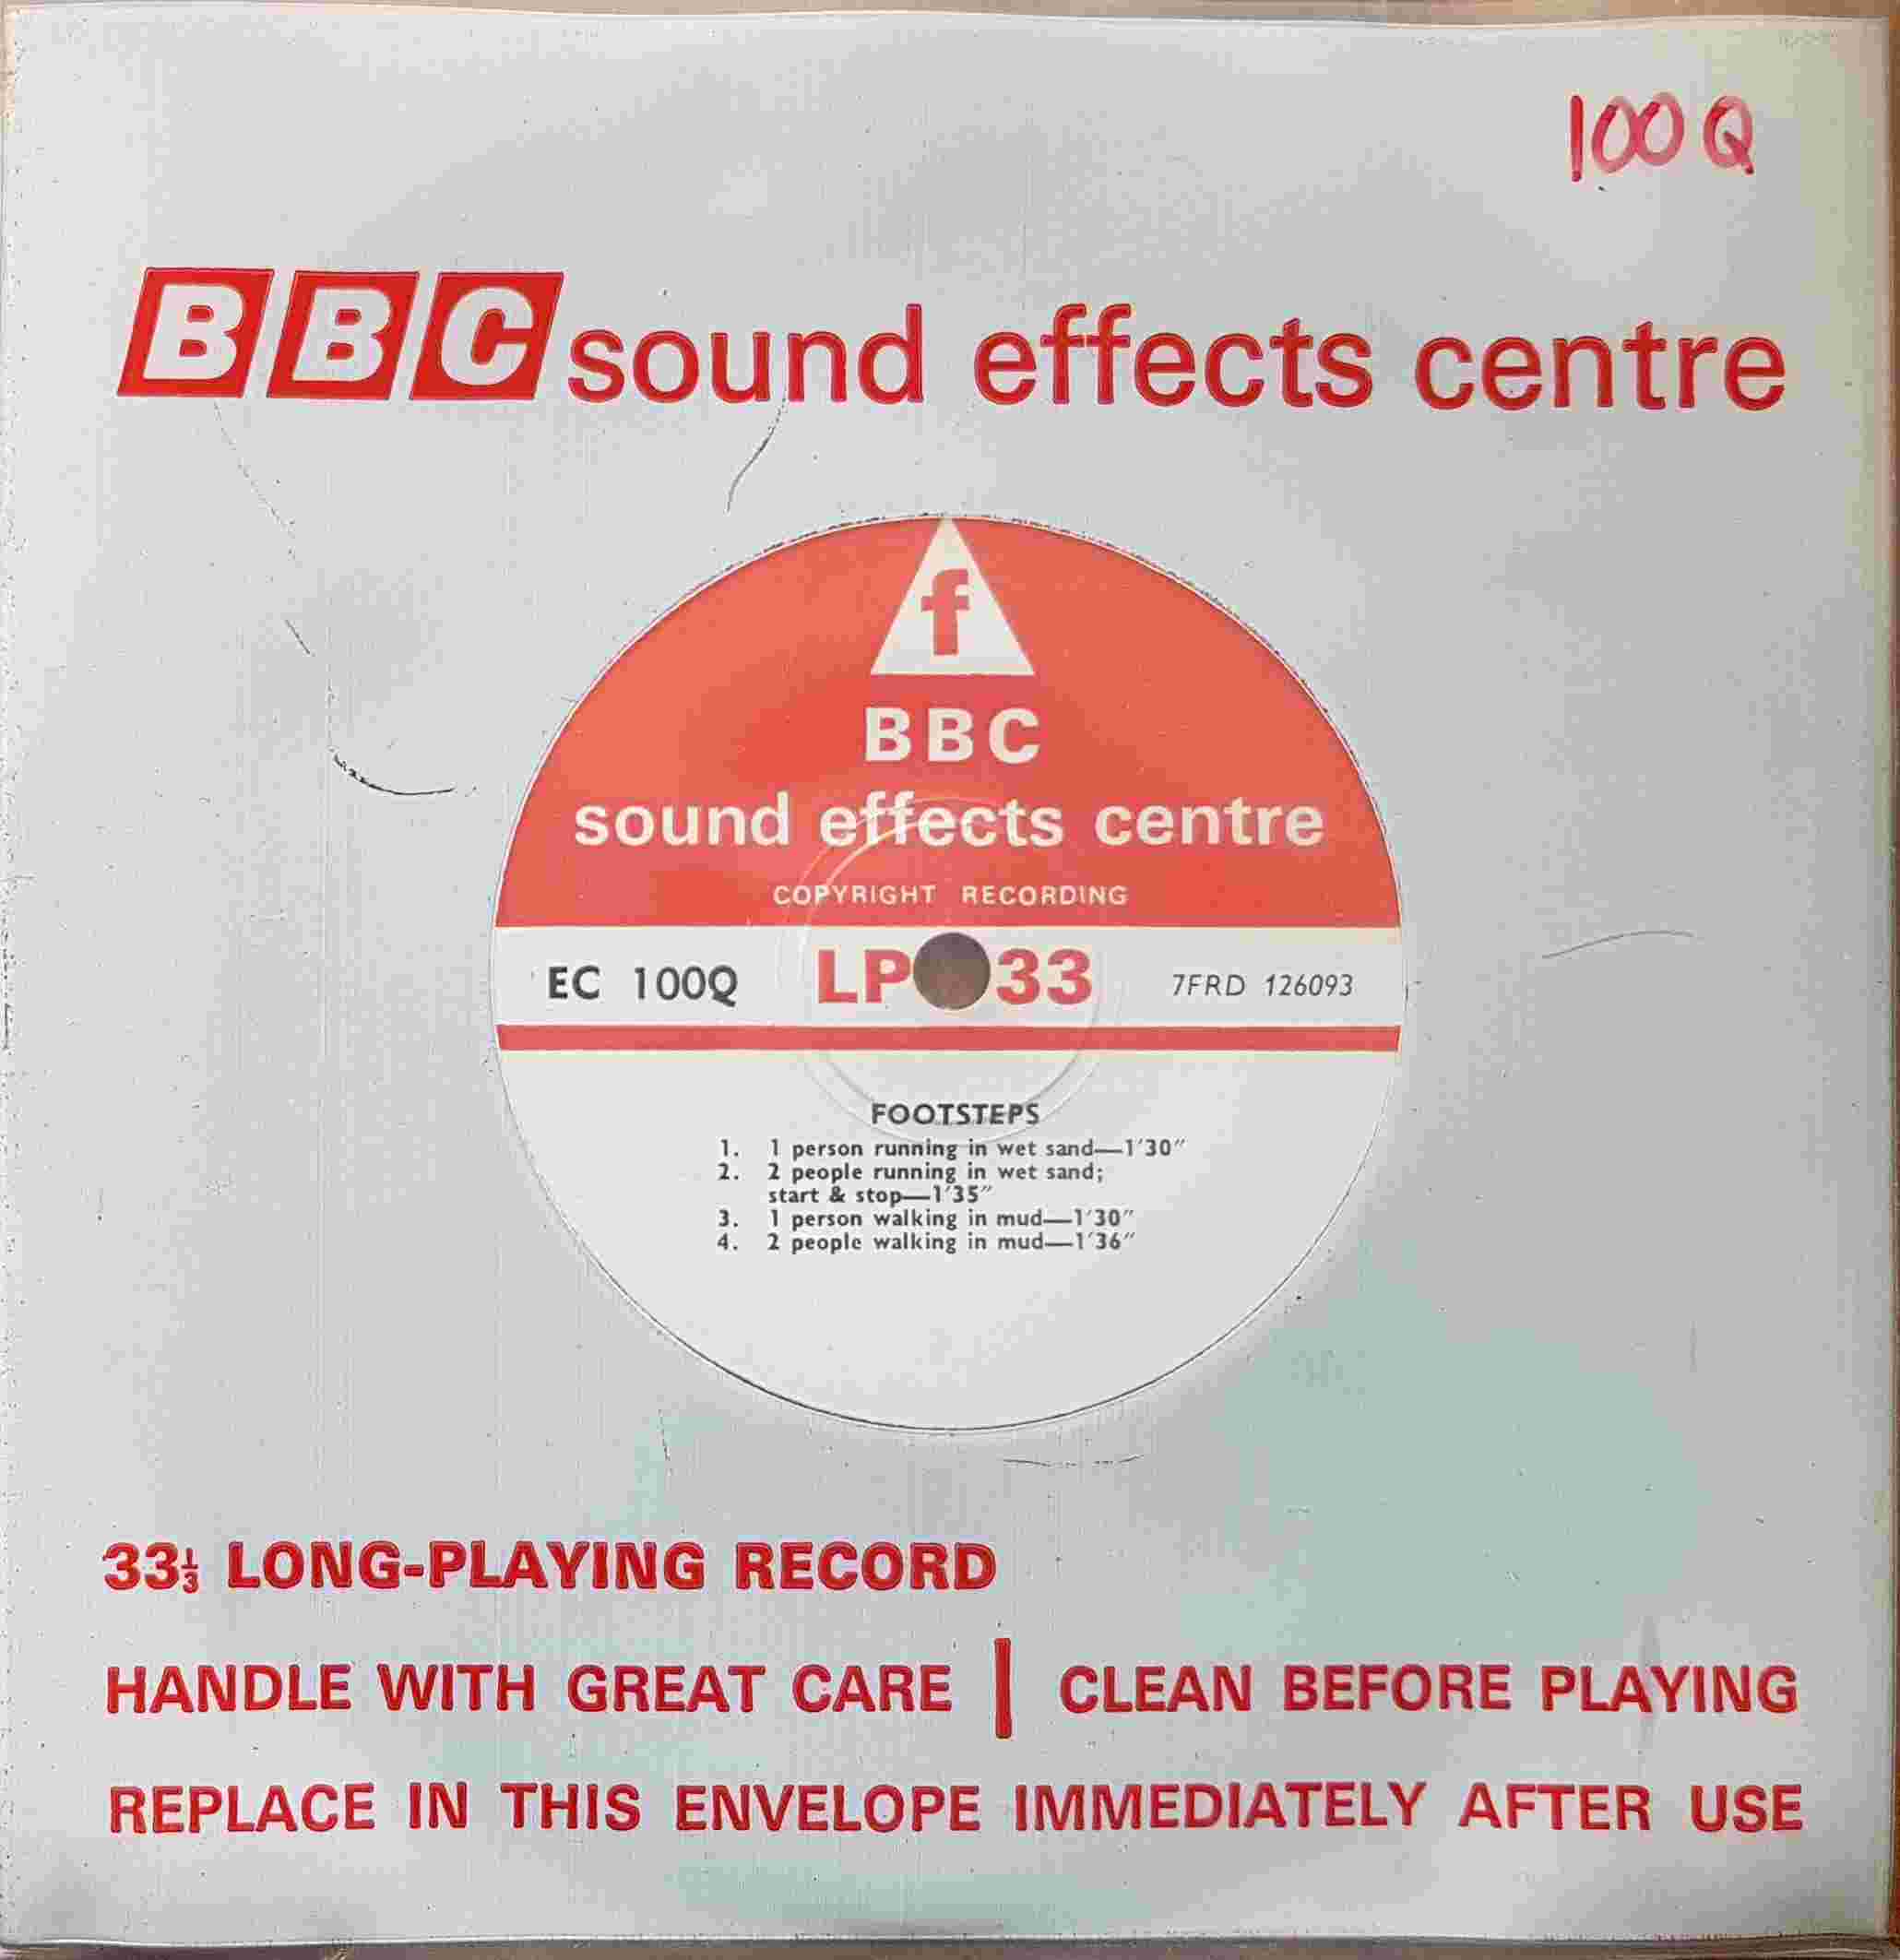 Picture of EC 100Q Footsteps by artist Not registered from the BBC records and Tapes library